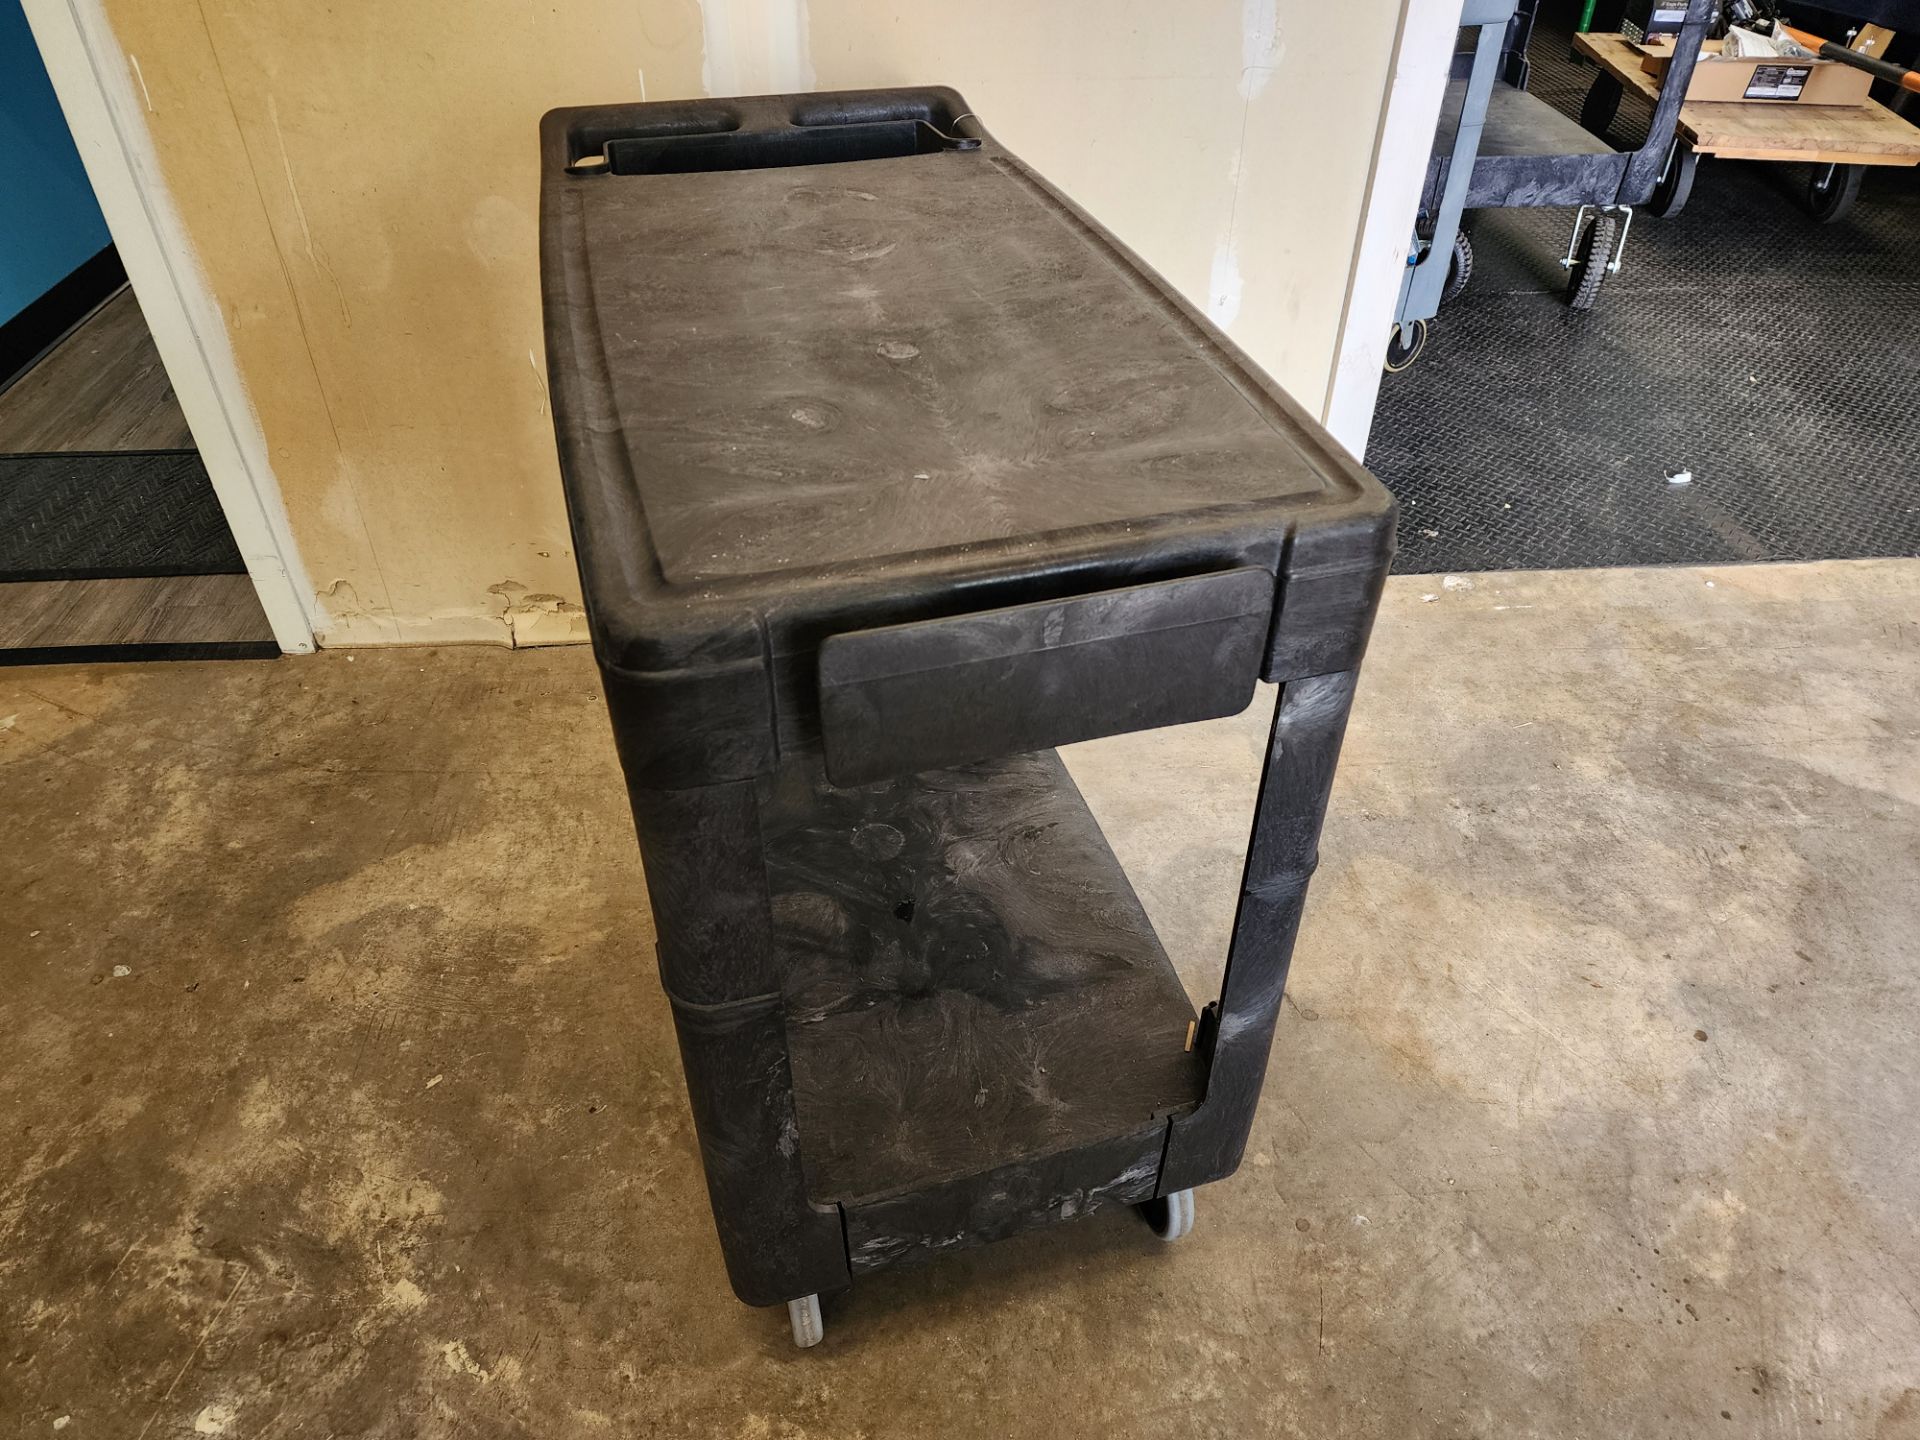 Black Rubbermaid Utility Cart, 2-Tier, 19"x30" - Image 3 of 3